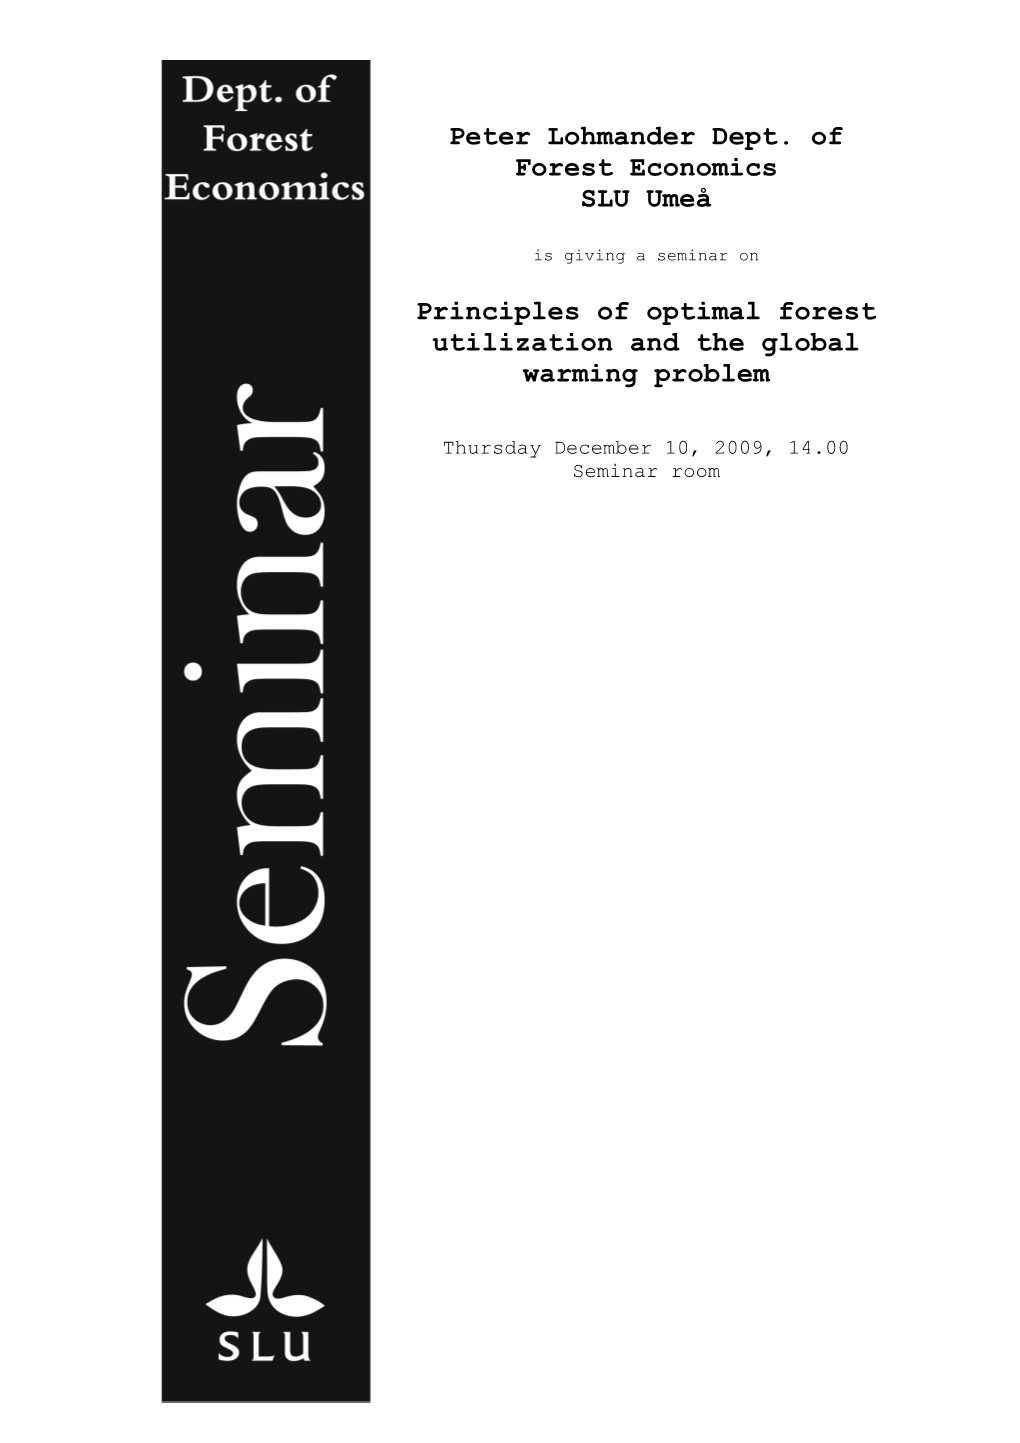 Principles of Optimal Forest Utilization and the Global Warming Problem